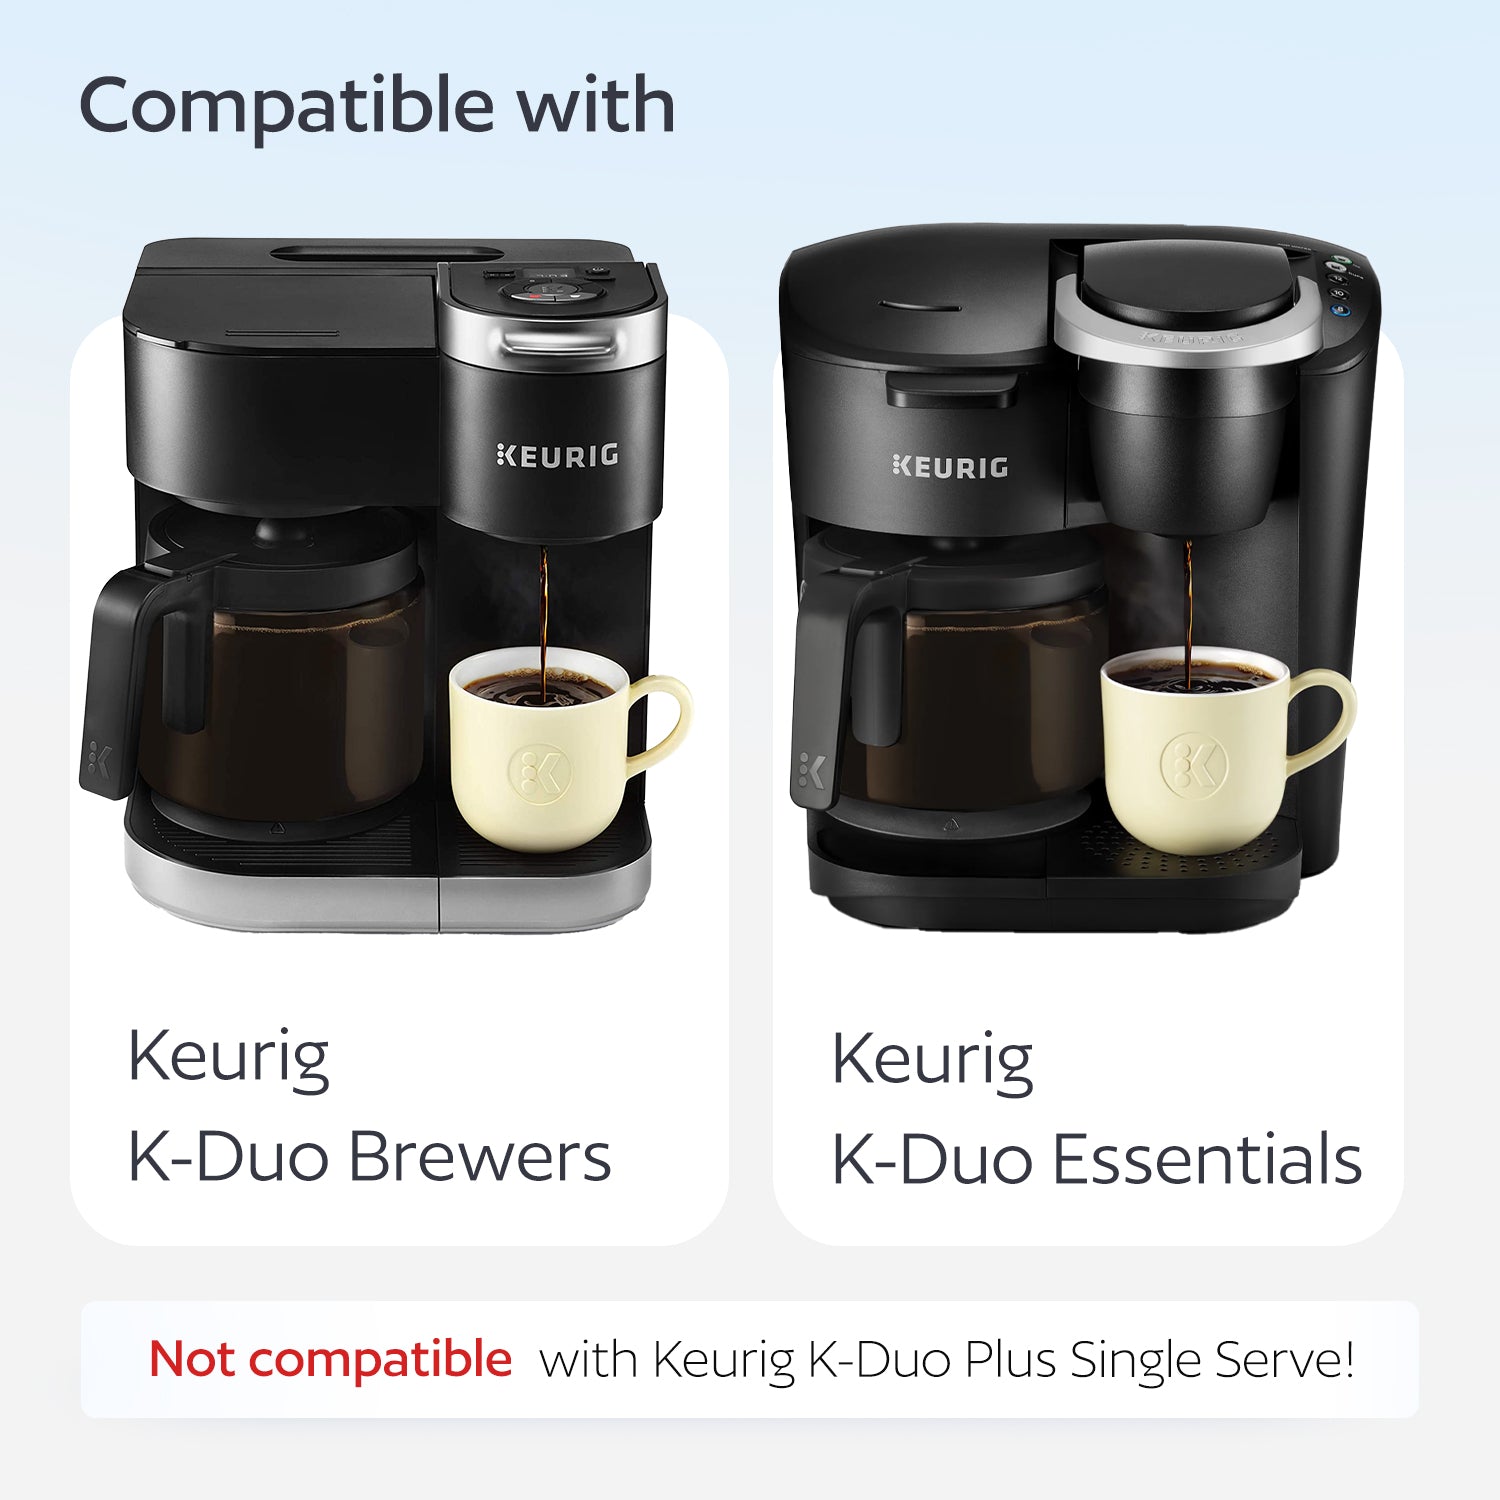 Reusable Keurig K Duo Coffee Filter for K-Duo Essentials and K-Duo Brewers Only - Carafe Basket Permanent Coffee Filters for Keurig Duo and K-Duo Essentials Coffee Makers Accessories